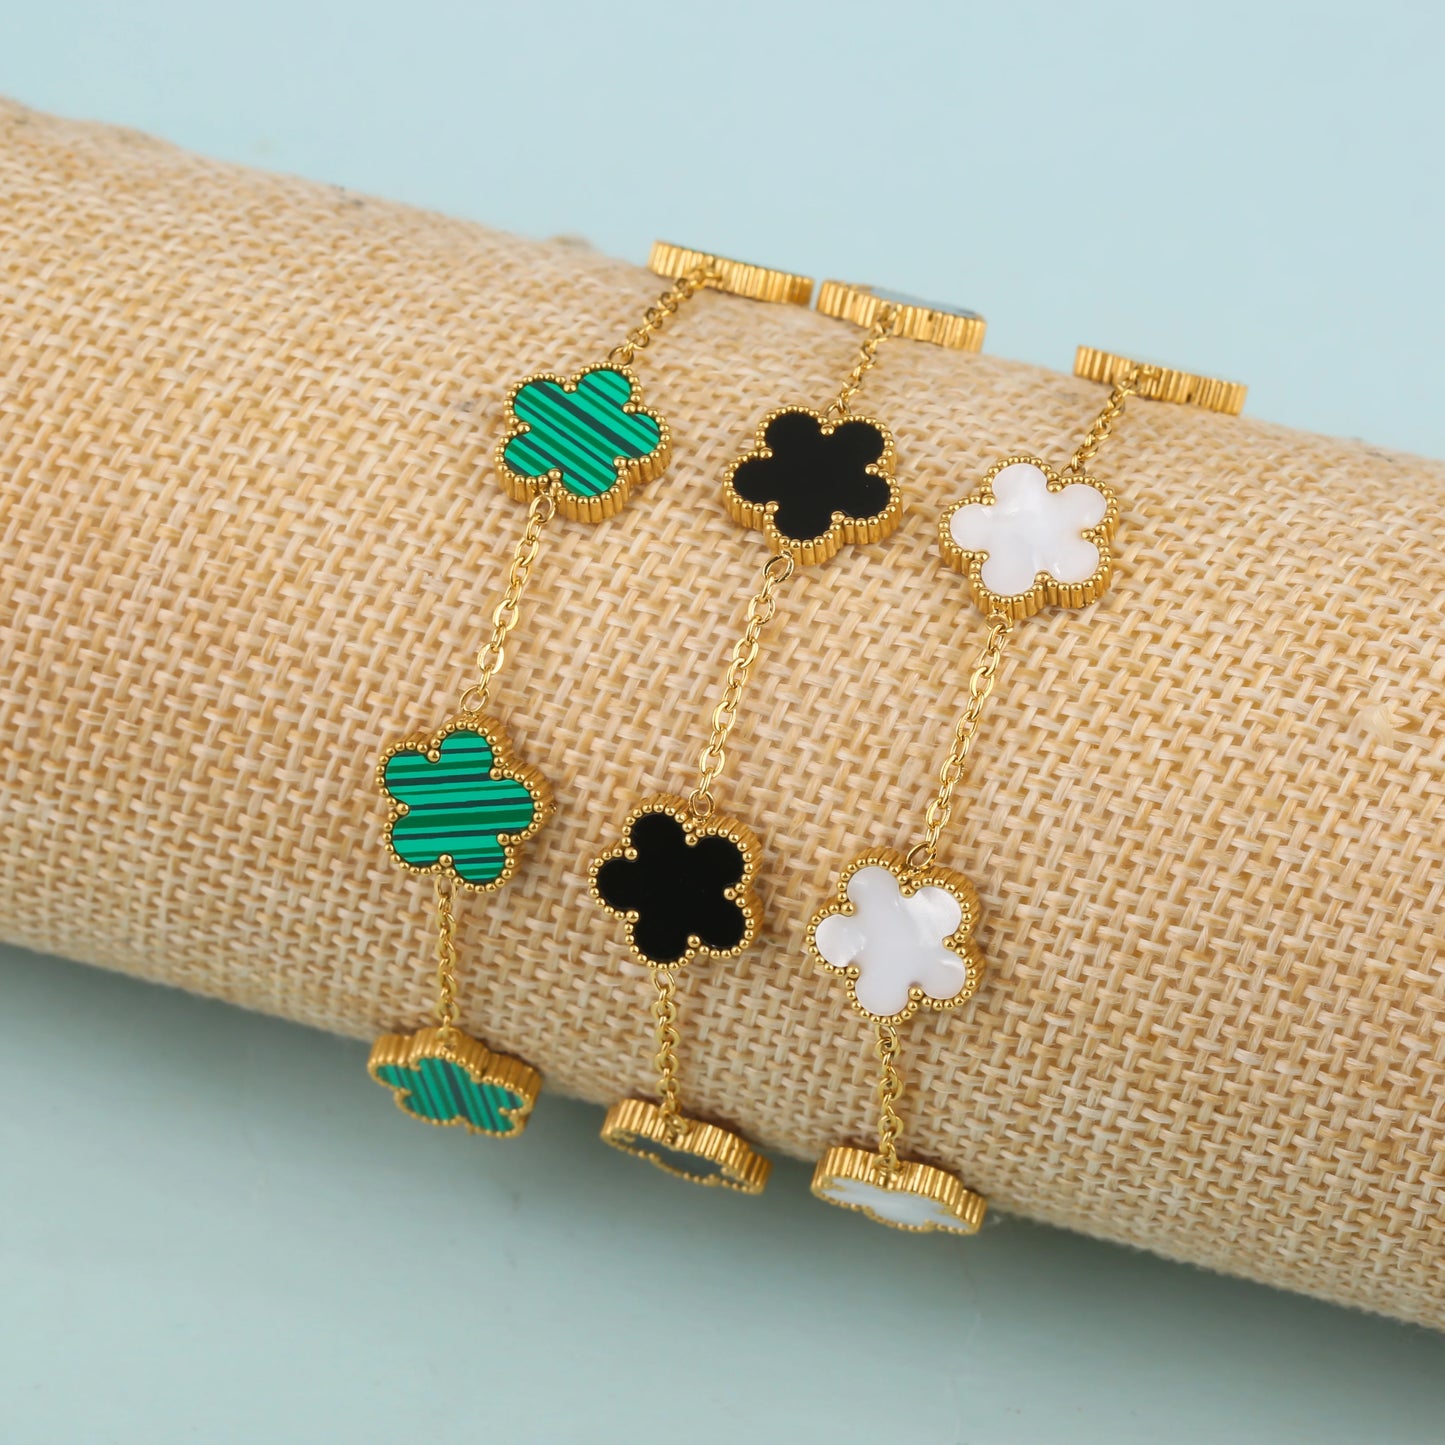 GLAM JEWEL Luxury Bracelet with 5 Gold-Plated Petals